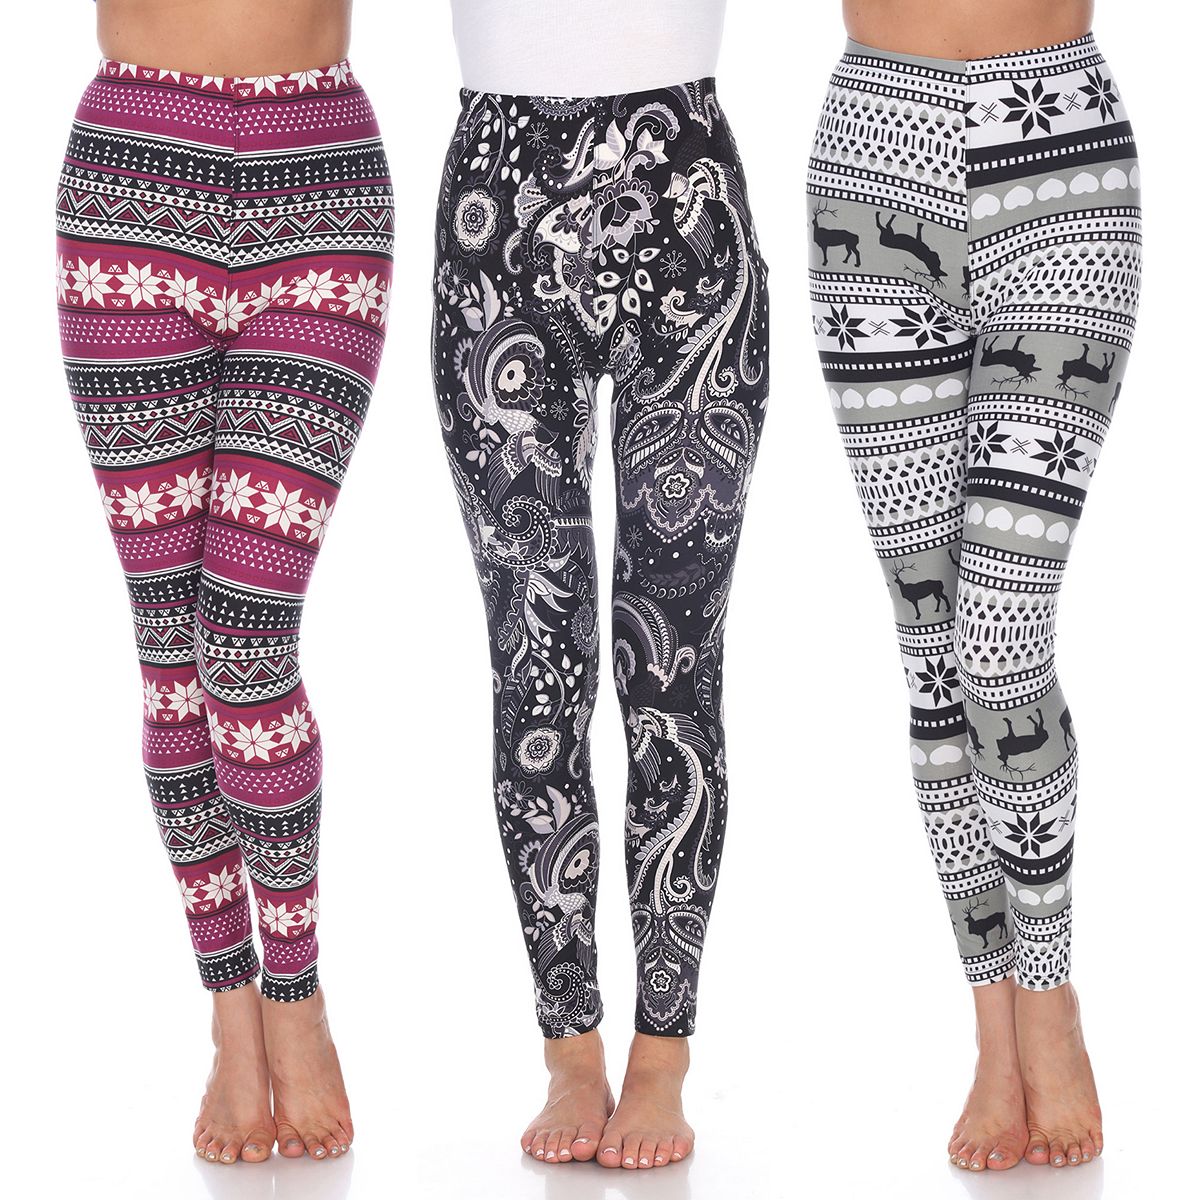 Women's Multi Color Leggings: Shop for Active Essentials for Everyday Wear